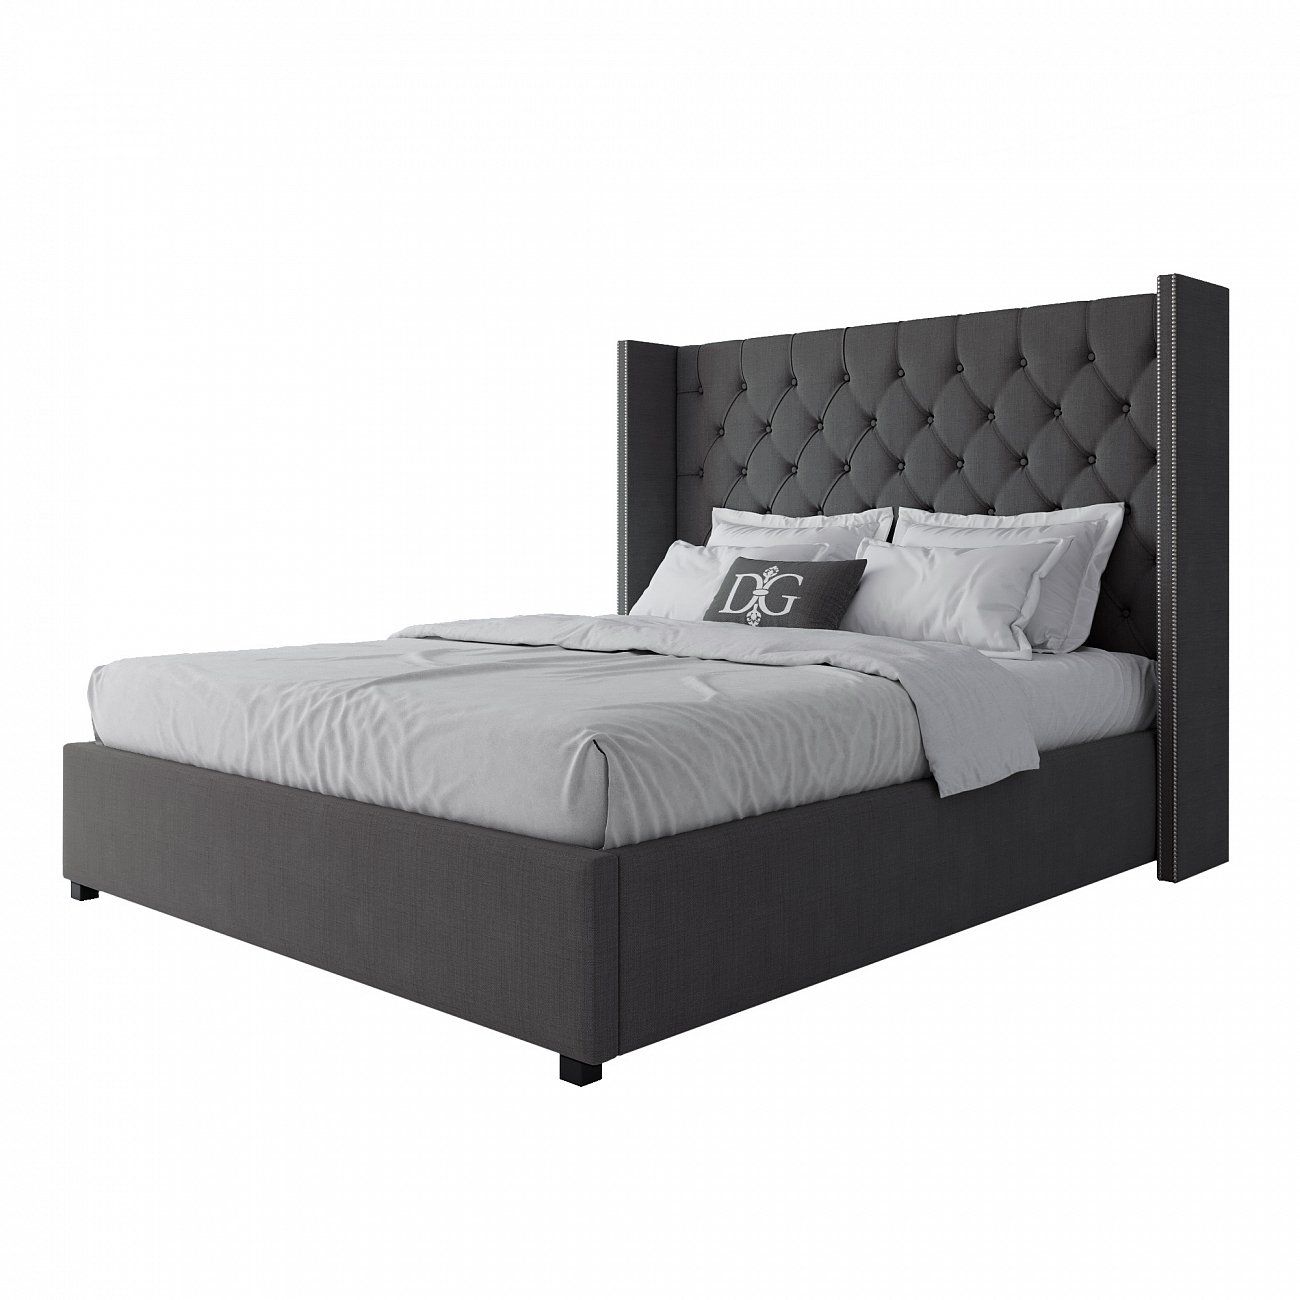 Double bed with upholstered headboard 160x200 cm dark grey Wing